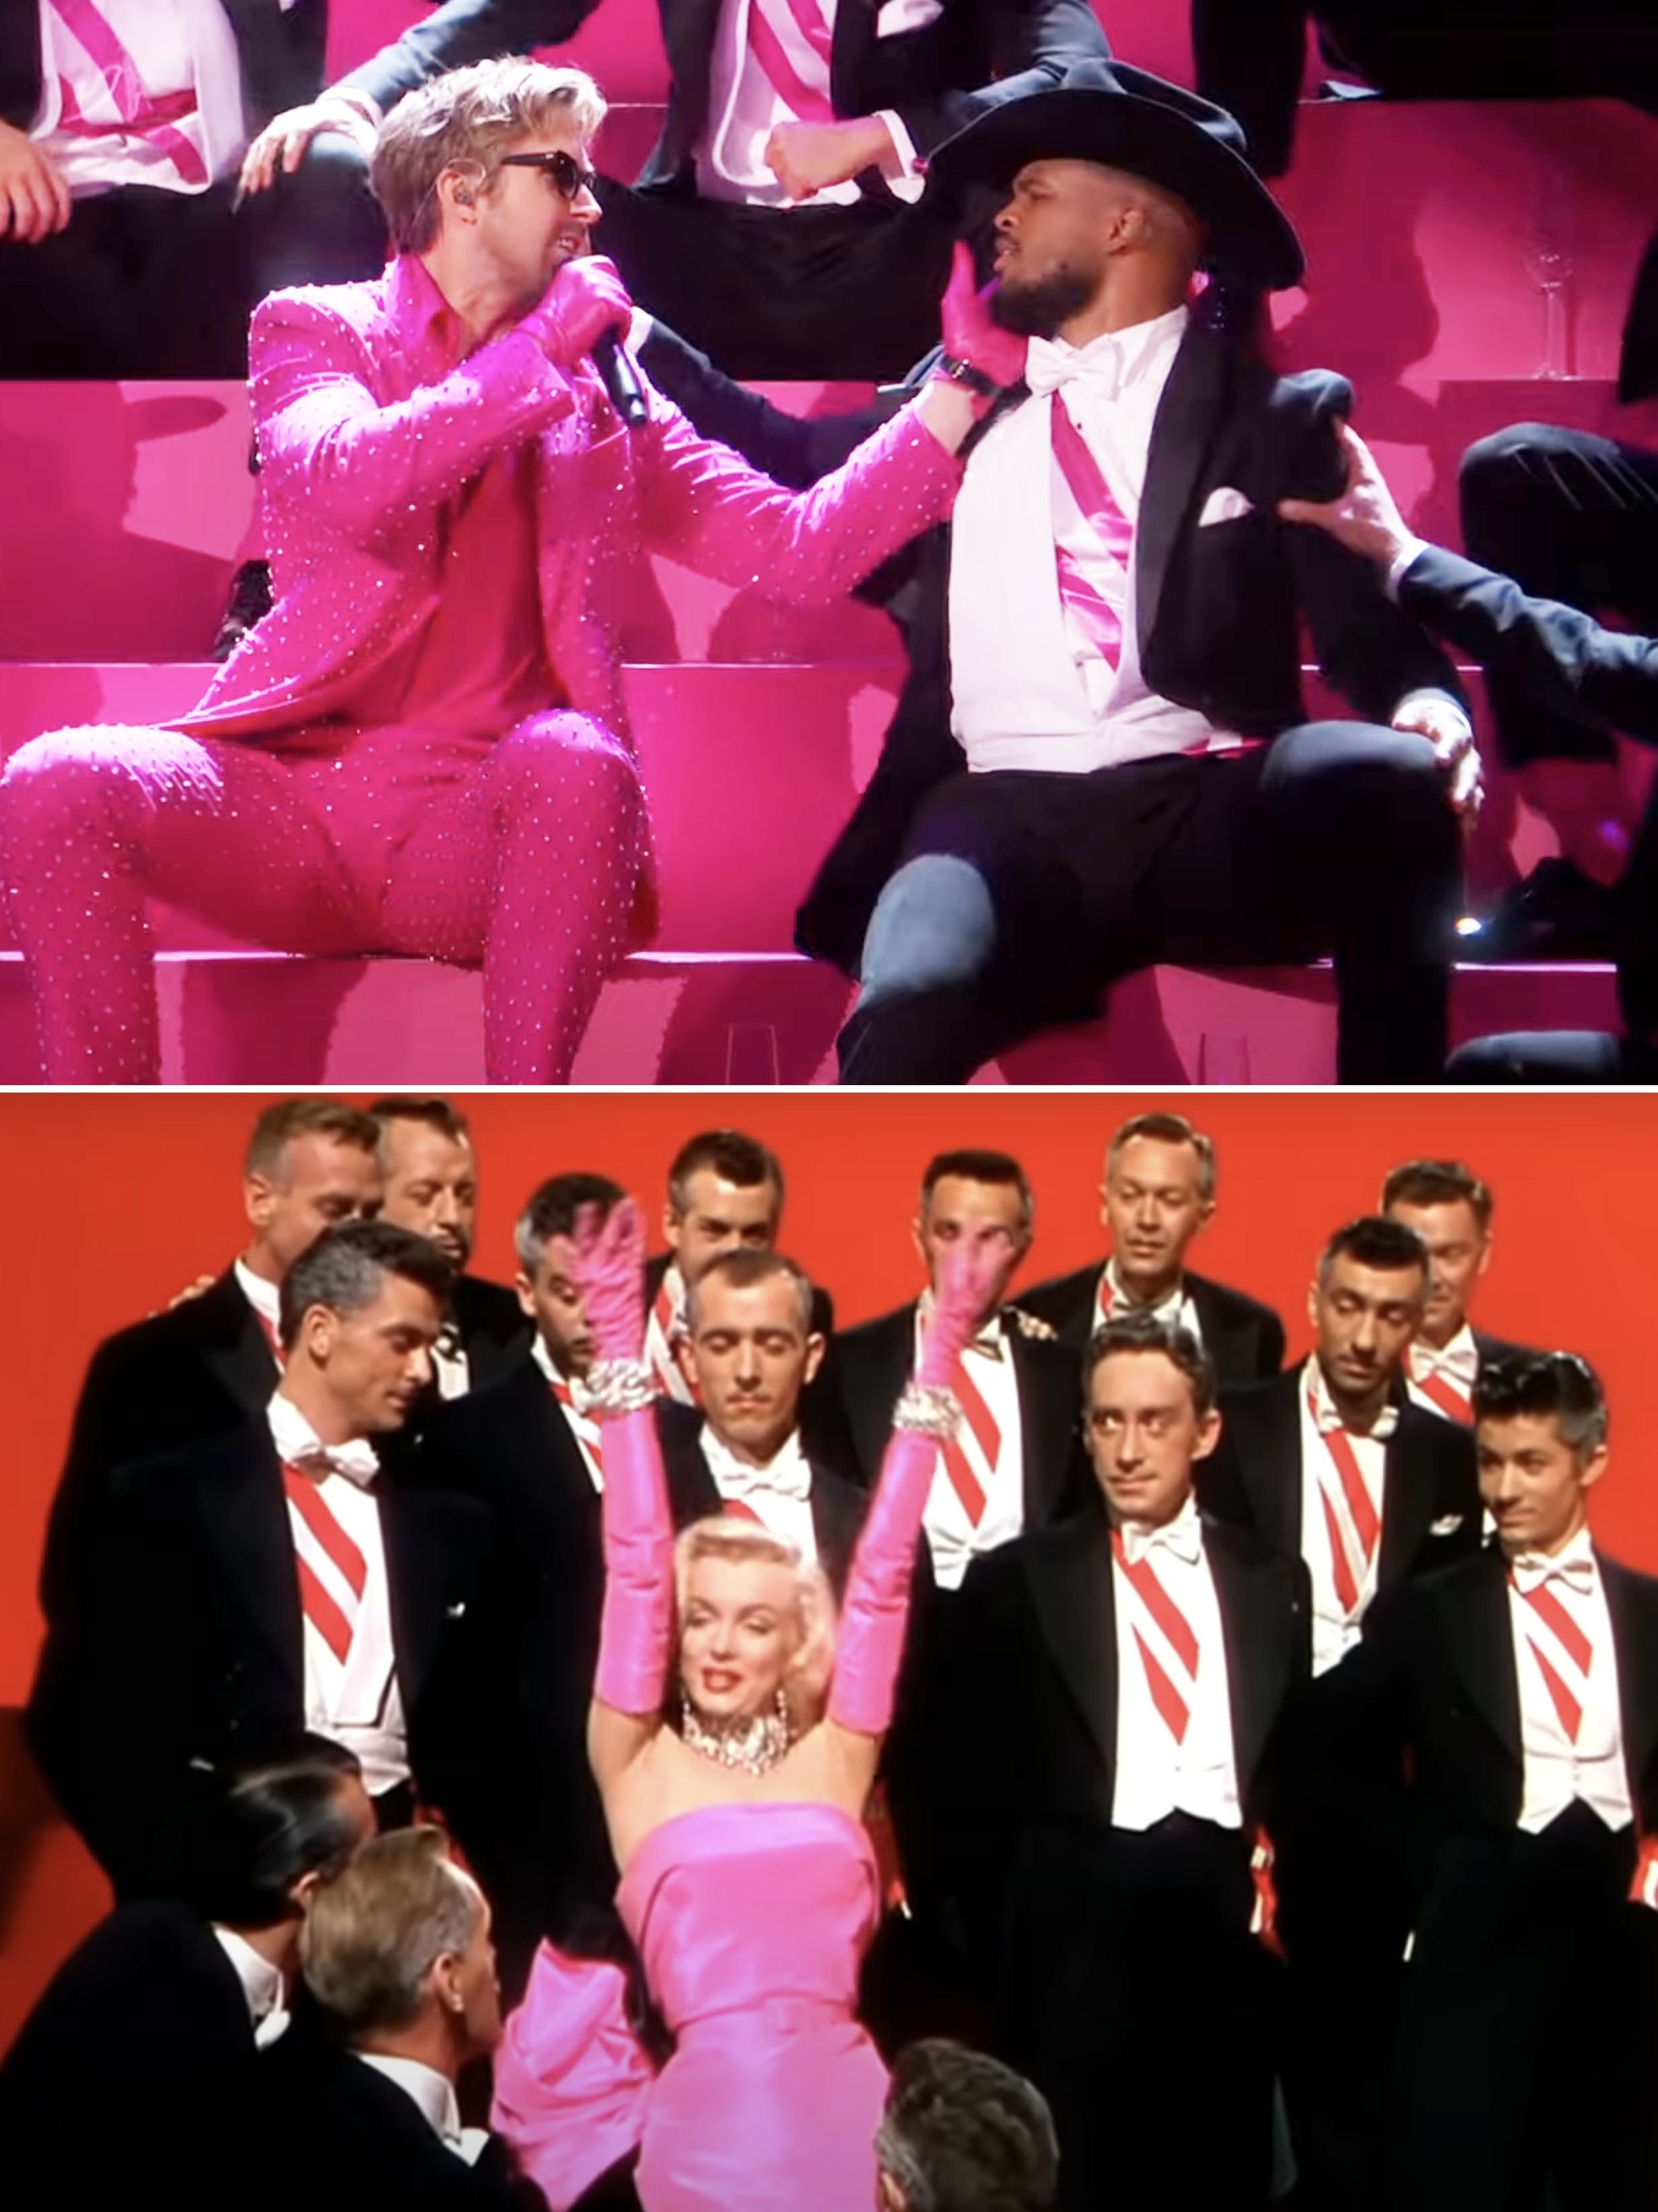 Screenshots from the Oscars and &quot;Gentlemen Prefer Blondes&quot;